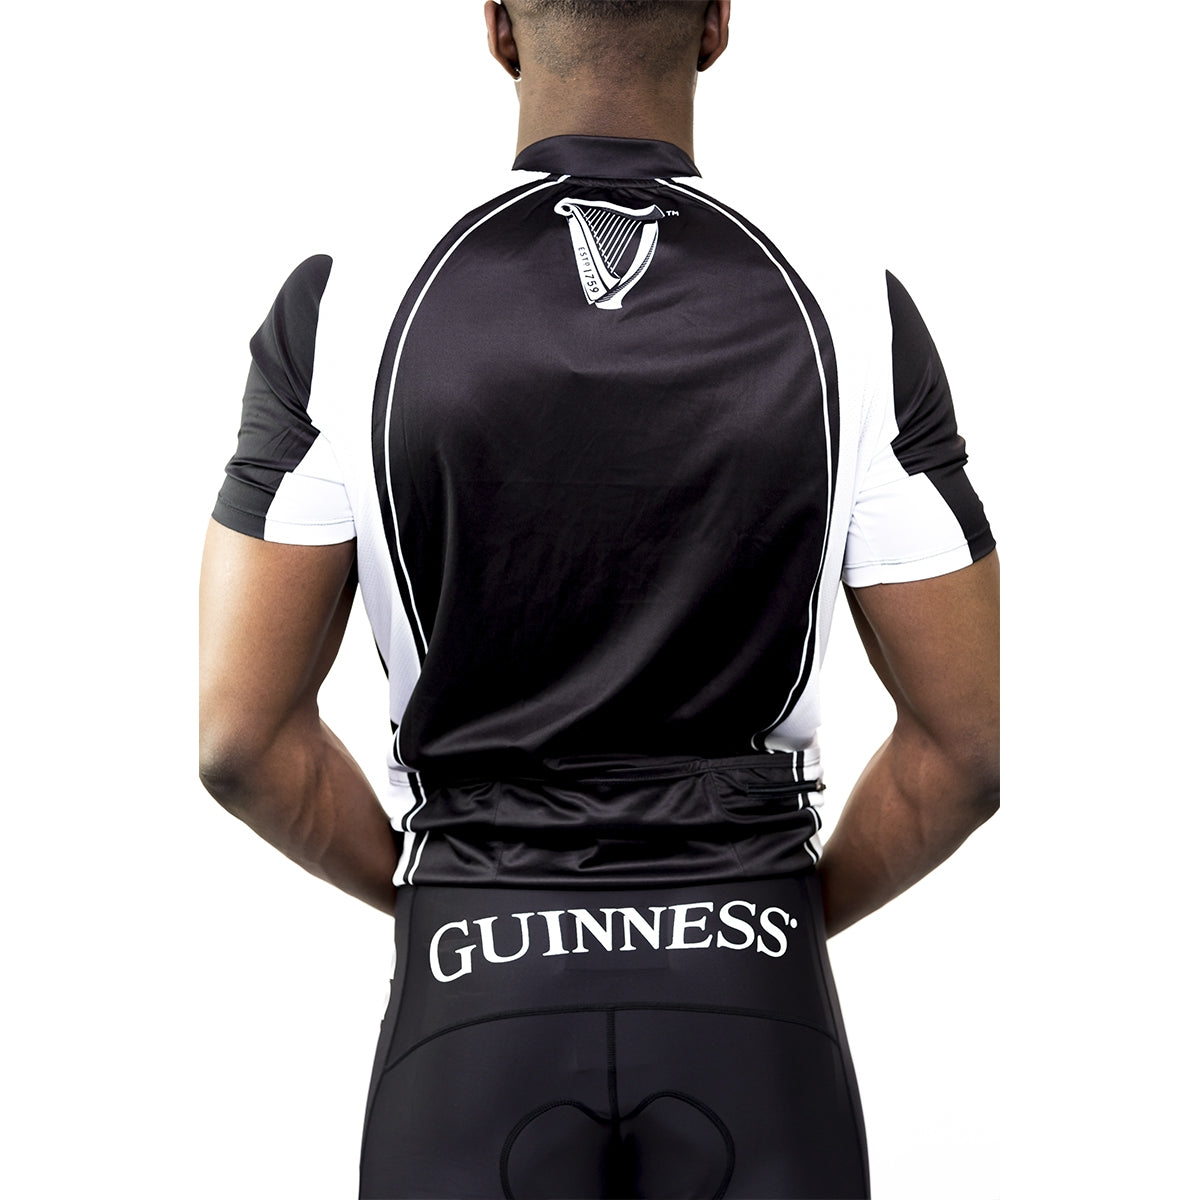 The back of a man wearing a Guinness Performance cycling jersey is a perfect combination of performance and style.